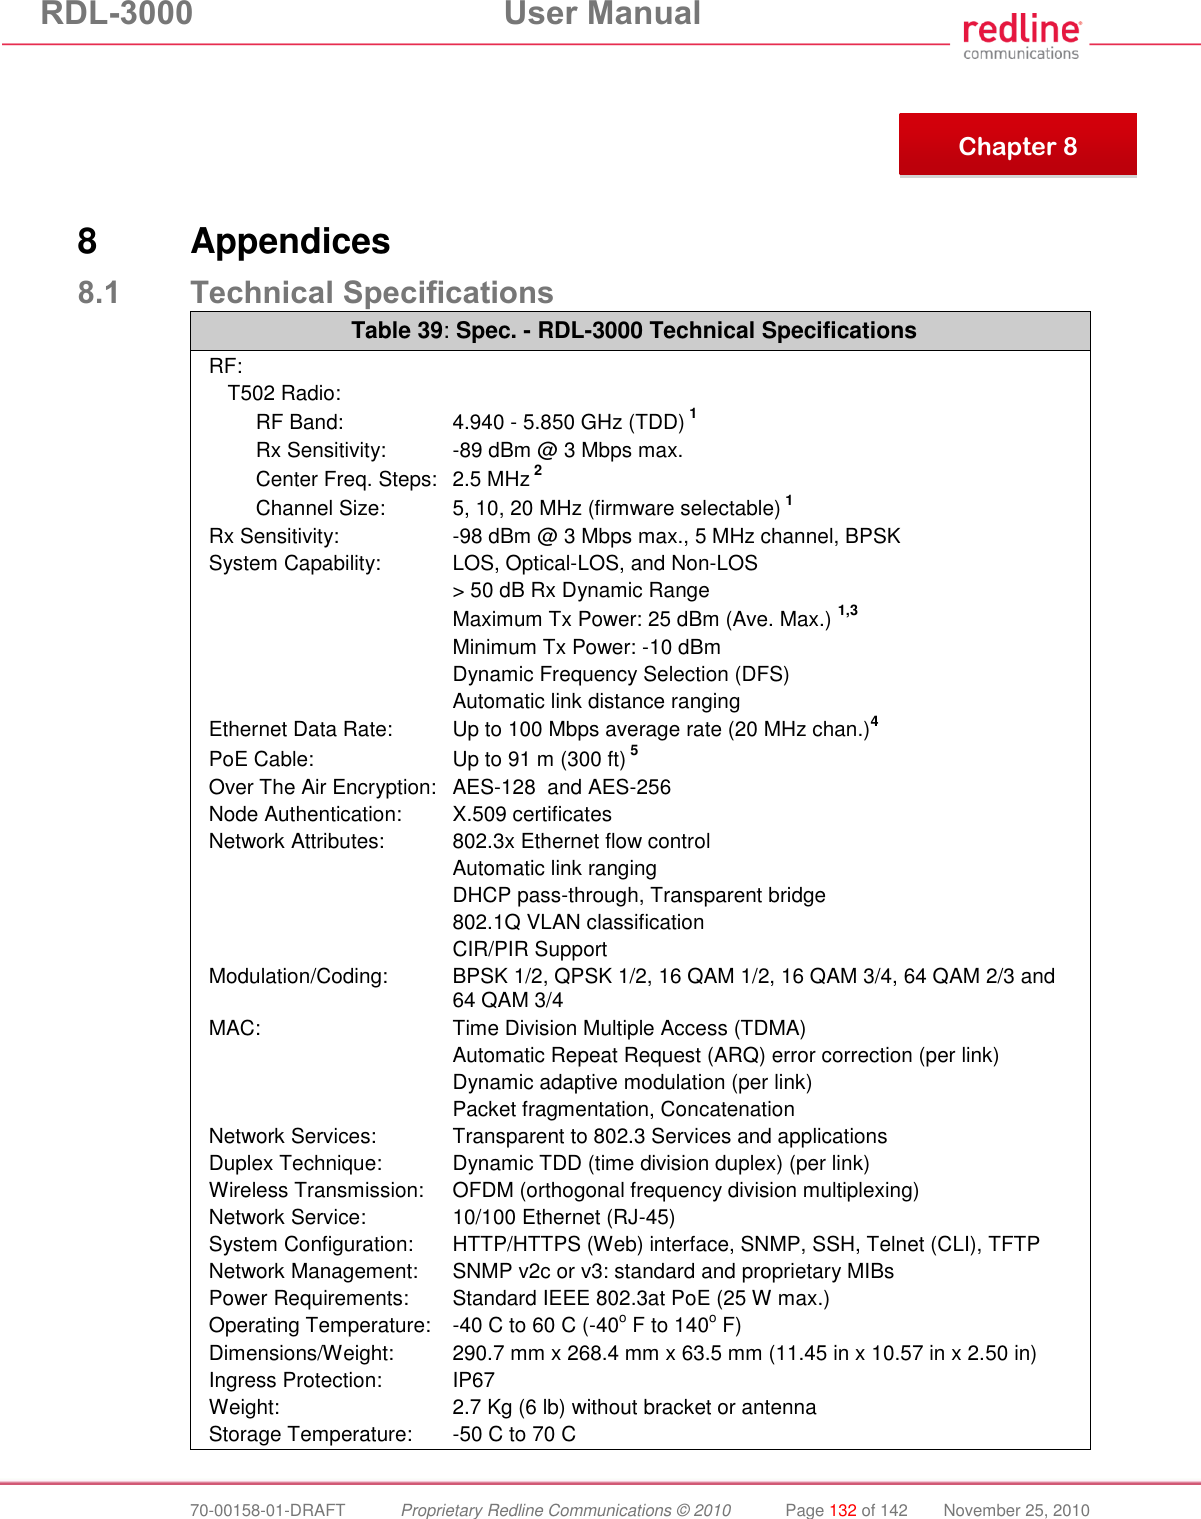 RDL-3000  User Manual  70-00158-01-DRAFT  Proprietary Redline Communications © 2010  Page 132 of 142  November 25, 2010       8  Appendices 8.1 Technical Specifications Table 39: Spec. - RDL-3000 Technical Specifications RF: T502 Radio:   RF Band:  4.940 - 5.850 GHz (TDD) 1   Rx Sensitivity:   -89 dBm @ 3 Mbps max.   Center Freq. Steps:  2.5 MHz 2   Channel Size:  5, 10, 20 MHz (firmware selectable) 1 Rx Sensitivity:  -98 dBm @ 3 Mbps max., 5 MHz channel, BPSK System Capability:  LOS, Optical-LOS, and Non-LOS   &gt; 50 dB Rx Dynamic Range   Maximum Tx Power: 25 dBm (Ave. Max.) 1,3   Minimum Tx Power: -10 dBm   Dynamic Frequency Selection (DFS)   Automatic link distance ranging Ethernet Data Rate:  Up to 100 Mbps average rate (20 MHz chan.)4 PoE Cable:  Up to 91 m (300 ft) 5 Over The Air Encryption:  AES-128  and AES-256 Node Authentication:  X.509 certificates Network Attributes:  802.3x Ethernet flow control   Automatic link ranging   DHCP pass-through, Transparent bridge   802.1Q VLAN classification   CIR/PIR Support Modulation/Coding:  BPSK 1/2, QPSK 1/2, 16 QAM 1/2, 16 QAM 3/4, 64 QAM 2/3 and 64 QAM 3/4 MAC:  Time Division Multiple Access (TDMA)   Automatic Repeat Request (ARQ) error correction (per link)   Dynamic adaptive modulation (per link)    Packet fragmentation, Concatenation Network Services:  Transparent to 802.3 Services and applications Duplex Technique:  Dynamic TDD (time division duplex) (per link) Wireless Transmission:  OFDM (orthogonal frequency division multiplexing) Network Service:  10/100 Ethernet (RJ-45) System Configuration:  HTTP/HTTPS (Web) interface, SNMP, SSH, Telnet (CLI), TFTP Network Management:  SNMP v2c or v3: standard and proprietary MIBs Power Requirements:  Standard IEEE 802.3at PoE (25 W max.) Operating Temperature:   -40 C to 60 C (-40o F to 140o F) Dimensions/Weight:  290.7 mm x 268.4 mm x 63.5 mm (11.45 in x 10.57 in x 2.50 in) Ingress Protection:  IP67 Weight:  2.7 Kg (6 lb) without bracket or antenna Storage Temperature:   -50 C to 70 C  Chapter 8 